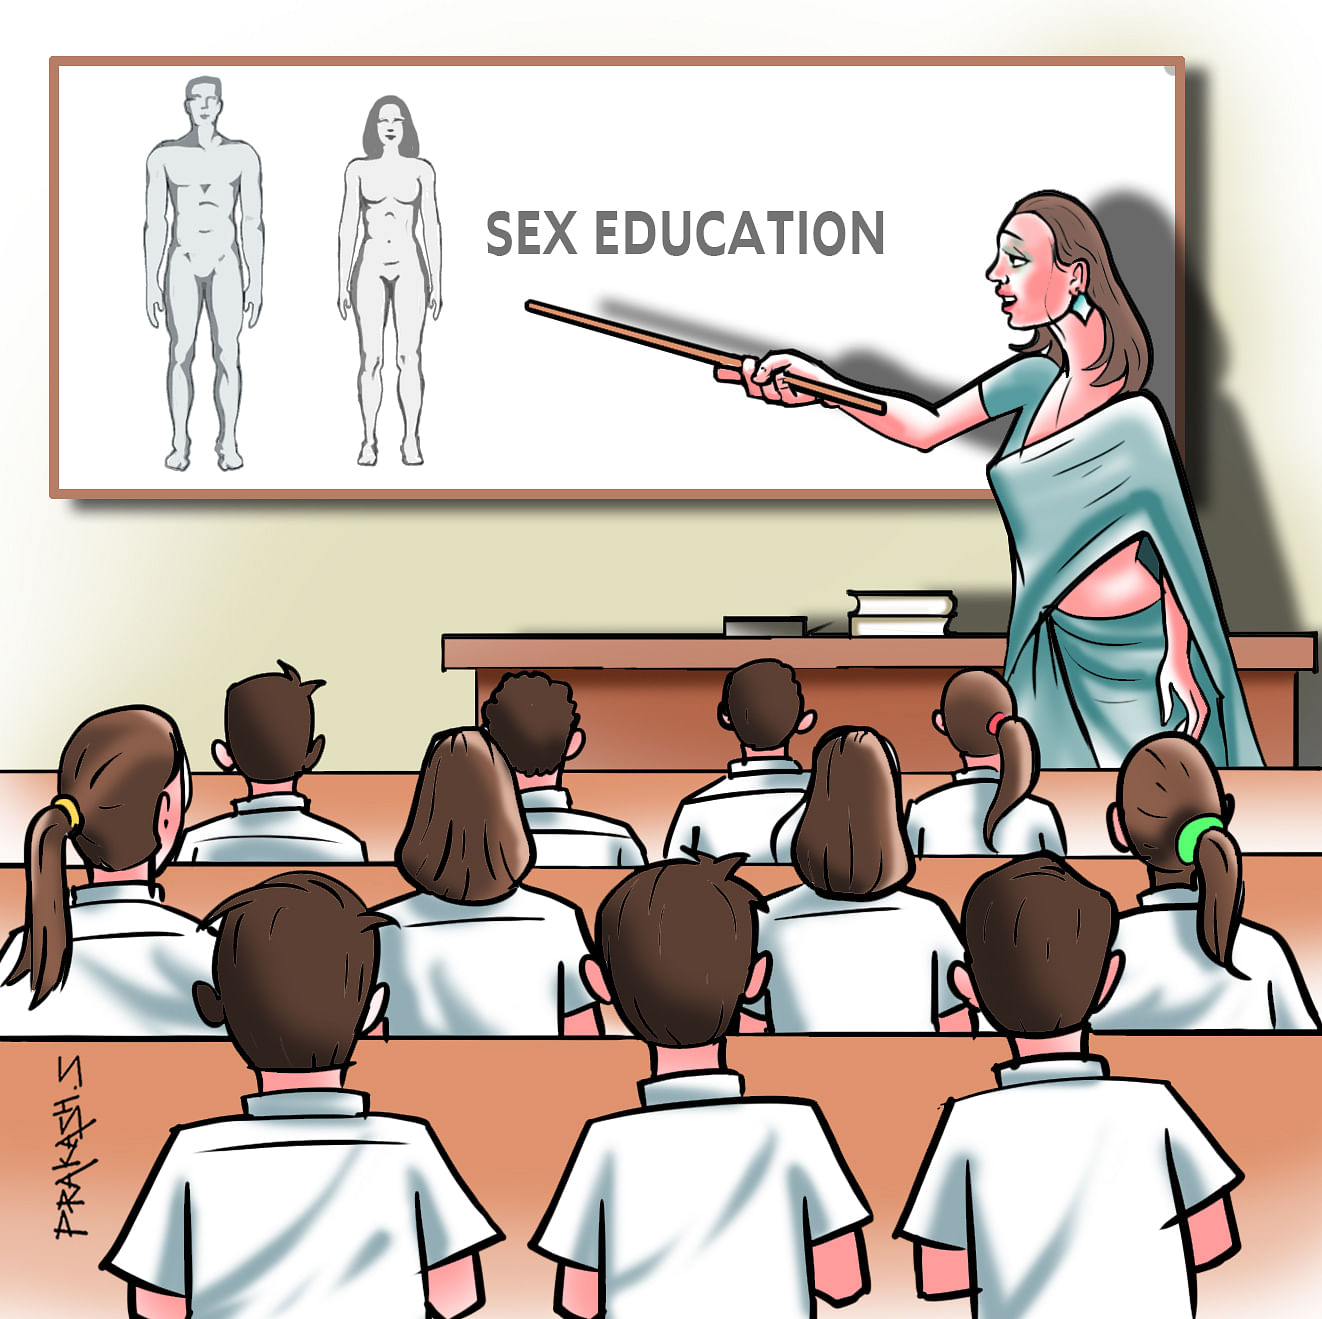 Experts say sexuality education is more important than sex education in today's world. 